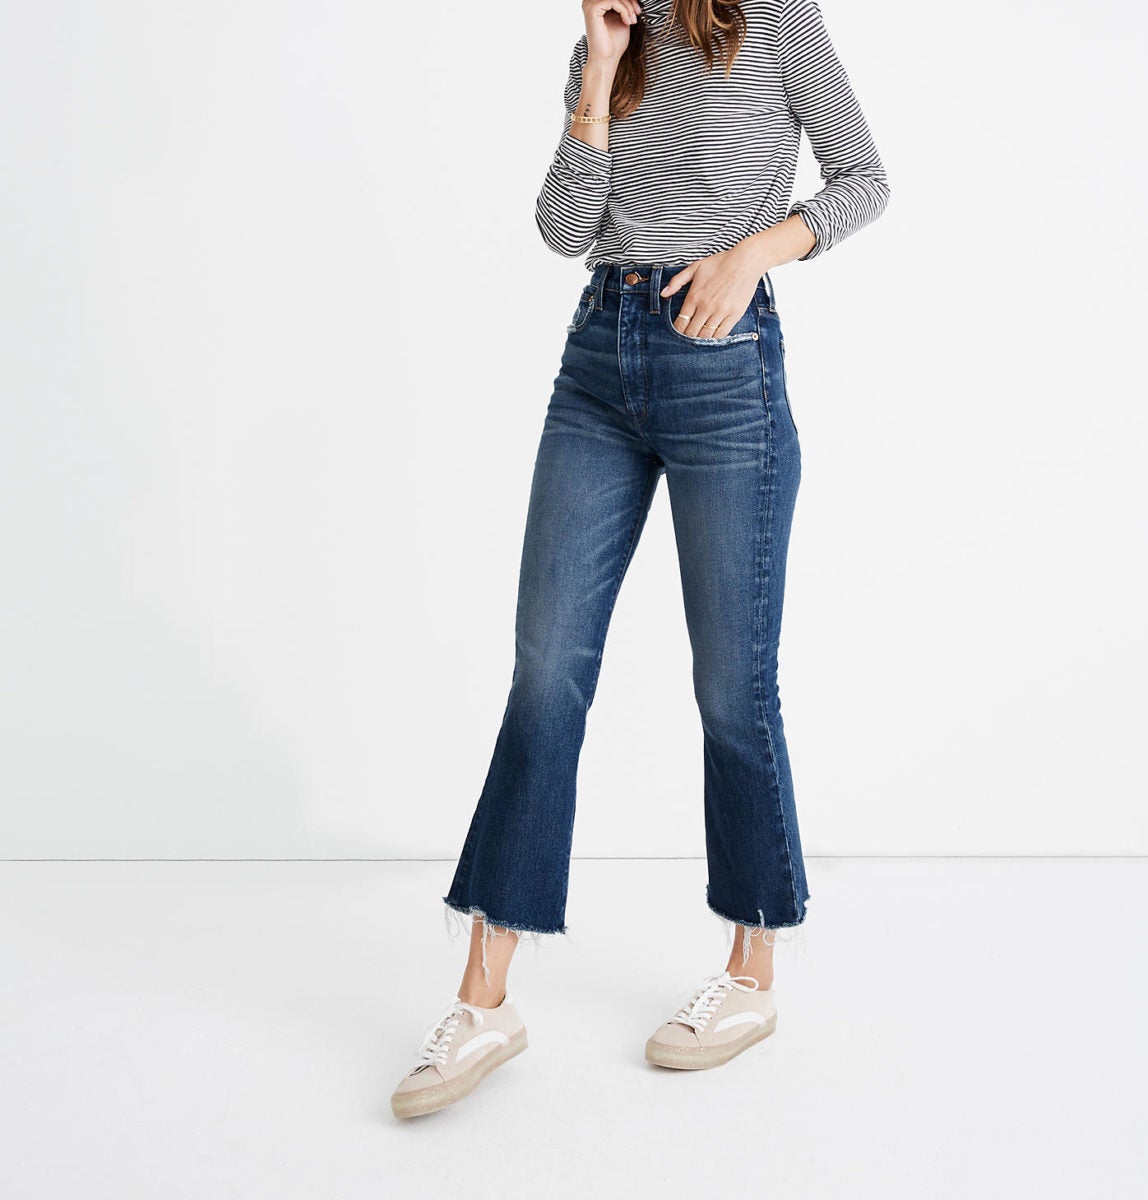 Kick Flare Jeans Are Going To Be Your Favorite Silhouette Of The Season ...